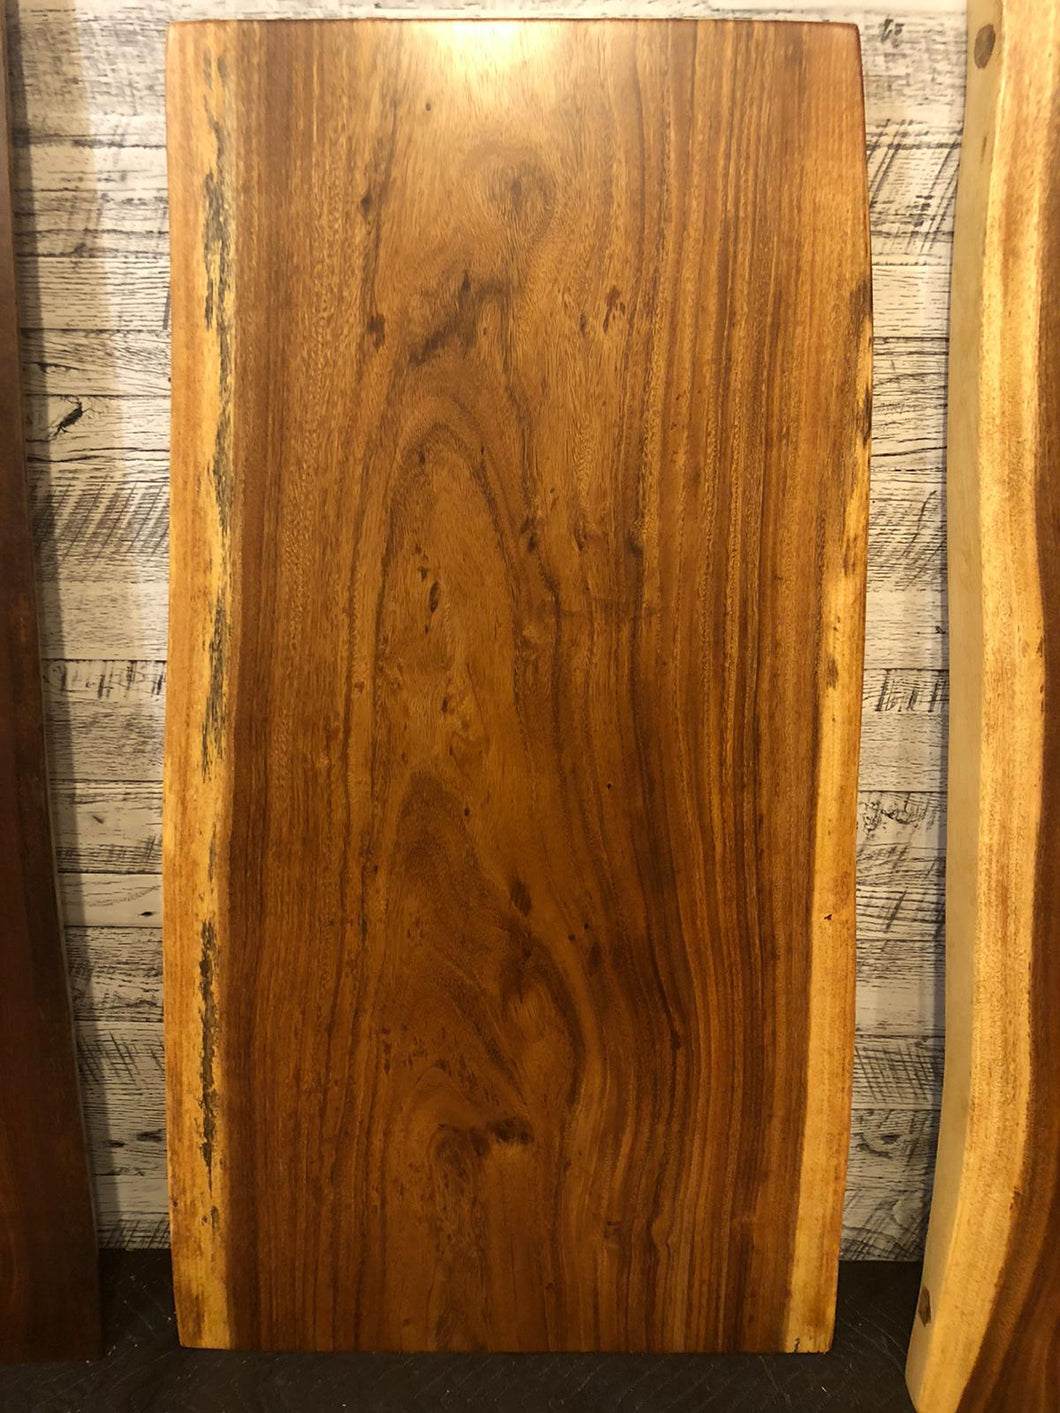 Live edge acacia slab for desk / small dining / coffee table